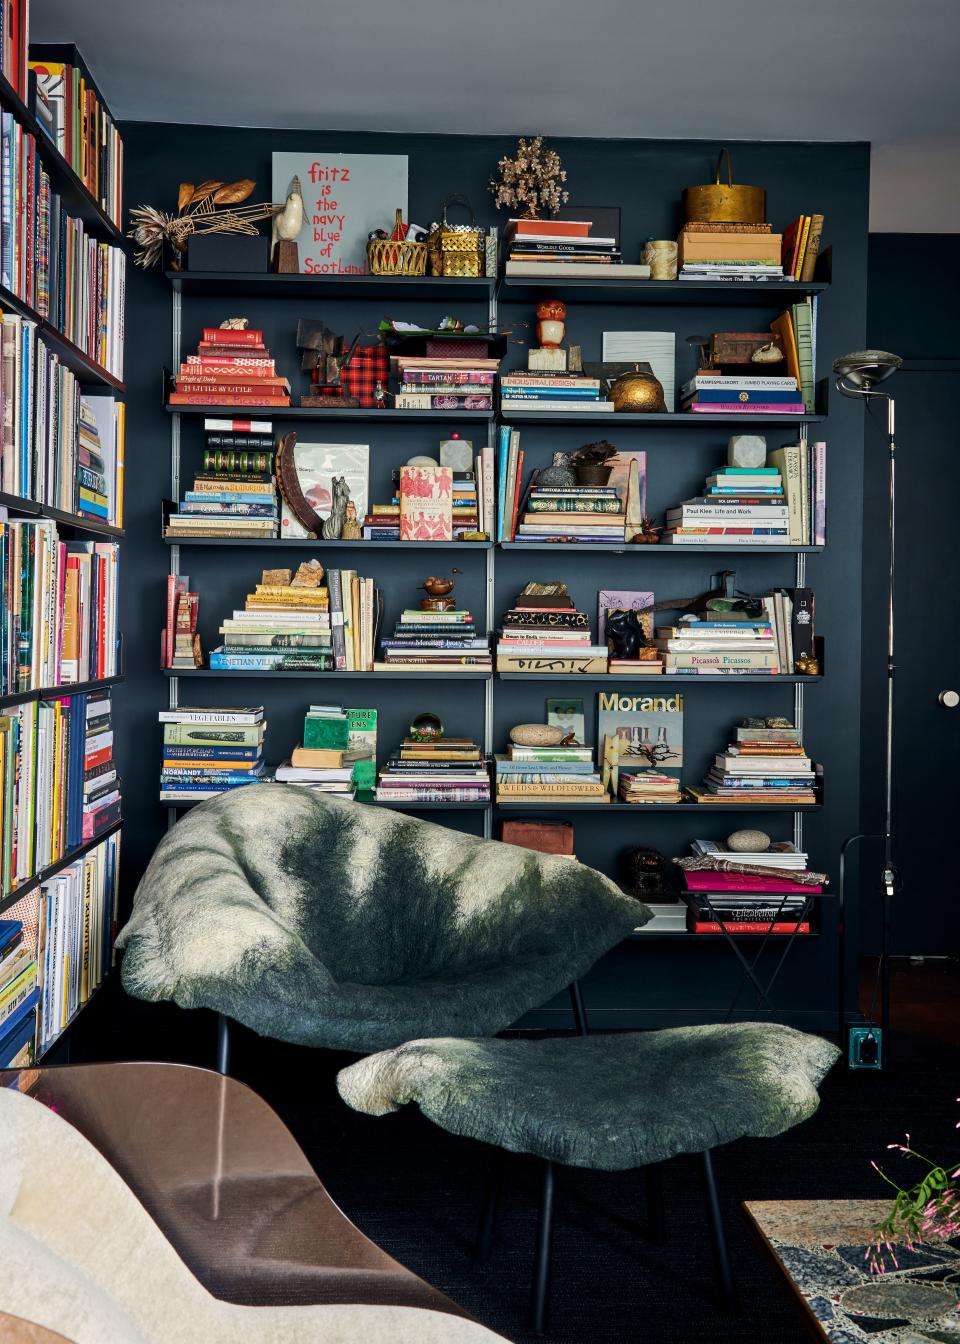 This corner of the library belongs to Mann’s partner, Fritz Karch, so to speak. The shelves on the back wall are stocked with a miscellany of vintage finds, part of Karch’s ever-growing collection of curiosities. The abstract armchair and ottoman are by Israeli designer Ayala Serfaty, purchased at Maison Gerard.